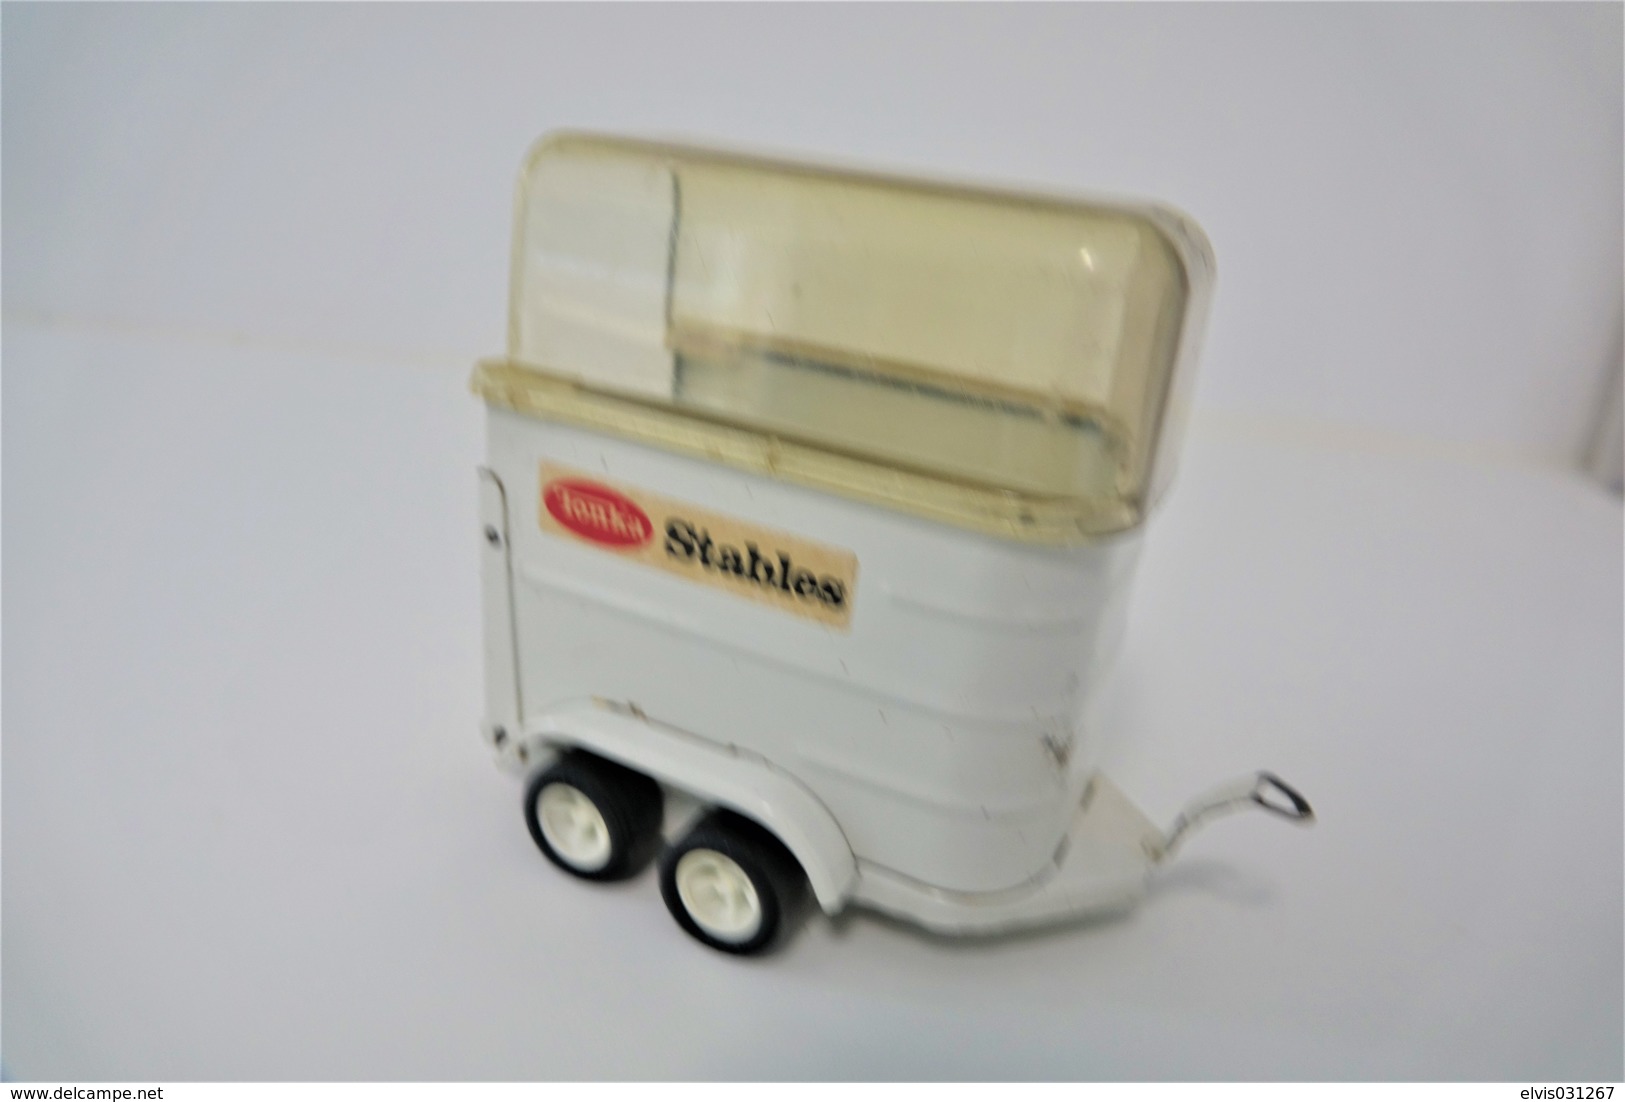 Tonka Toy , Tonka Stables Horse Trailer 52690 , Made In Japan, 1970's *** - Dinky